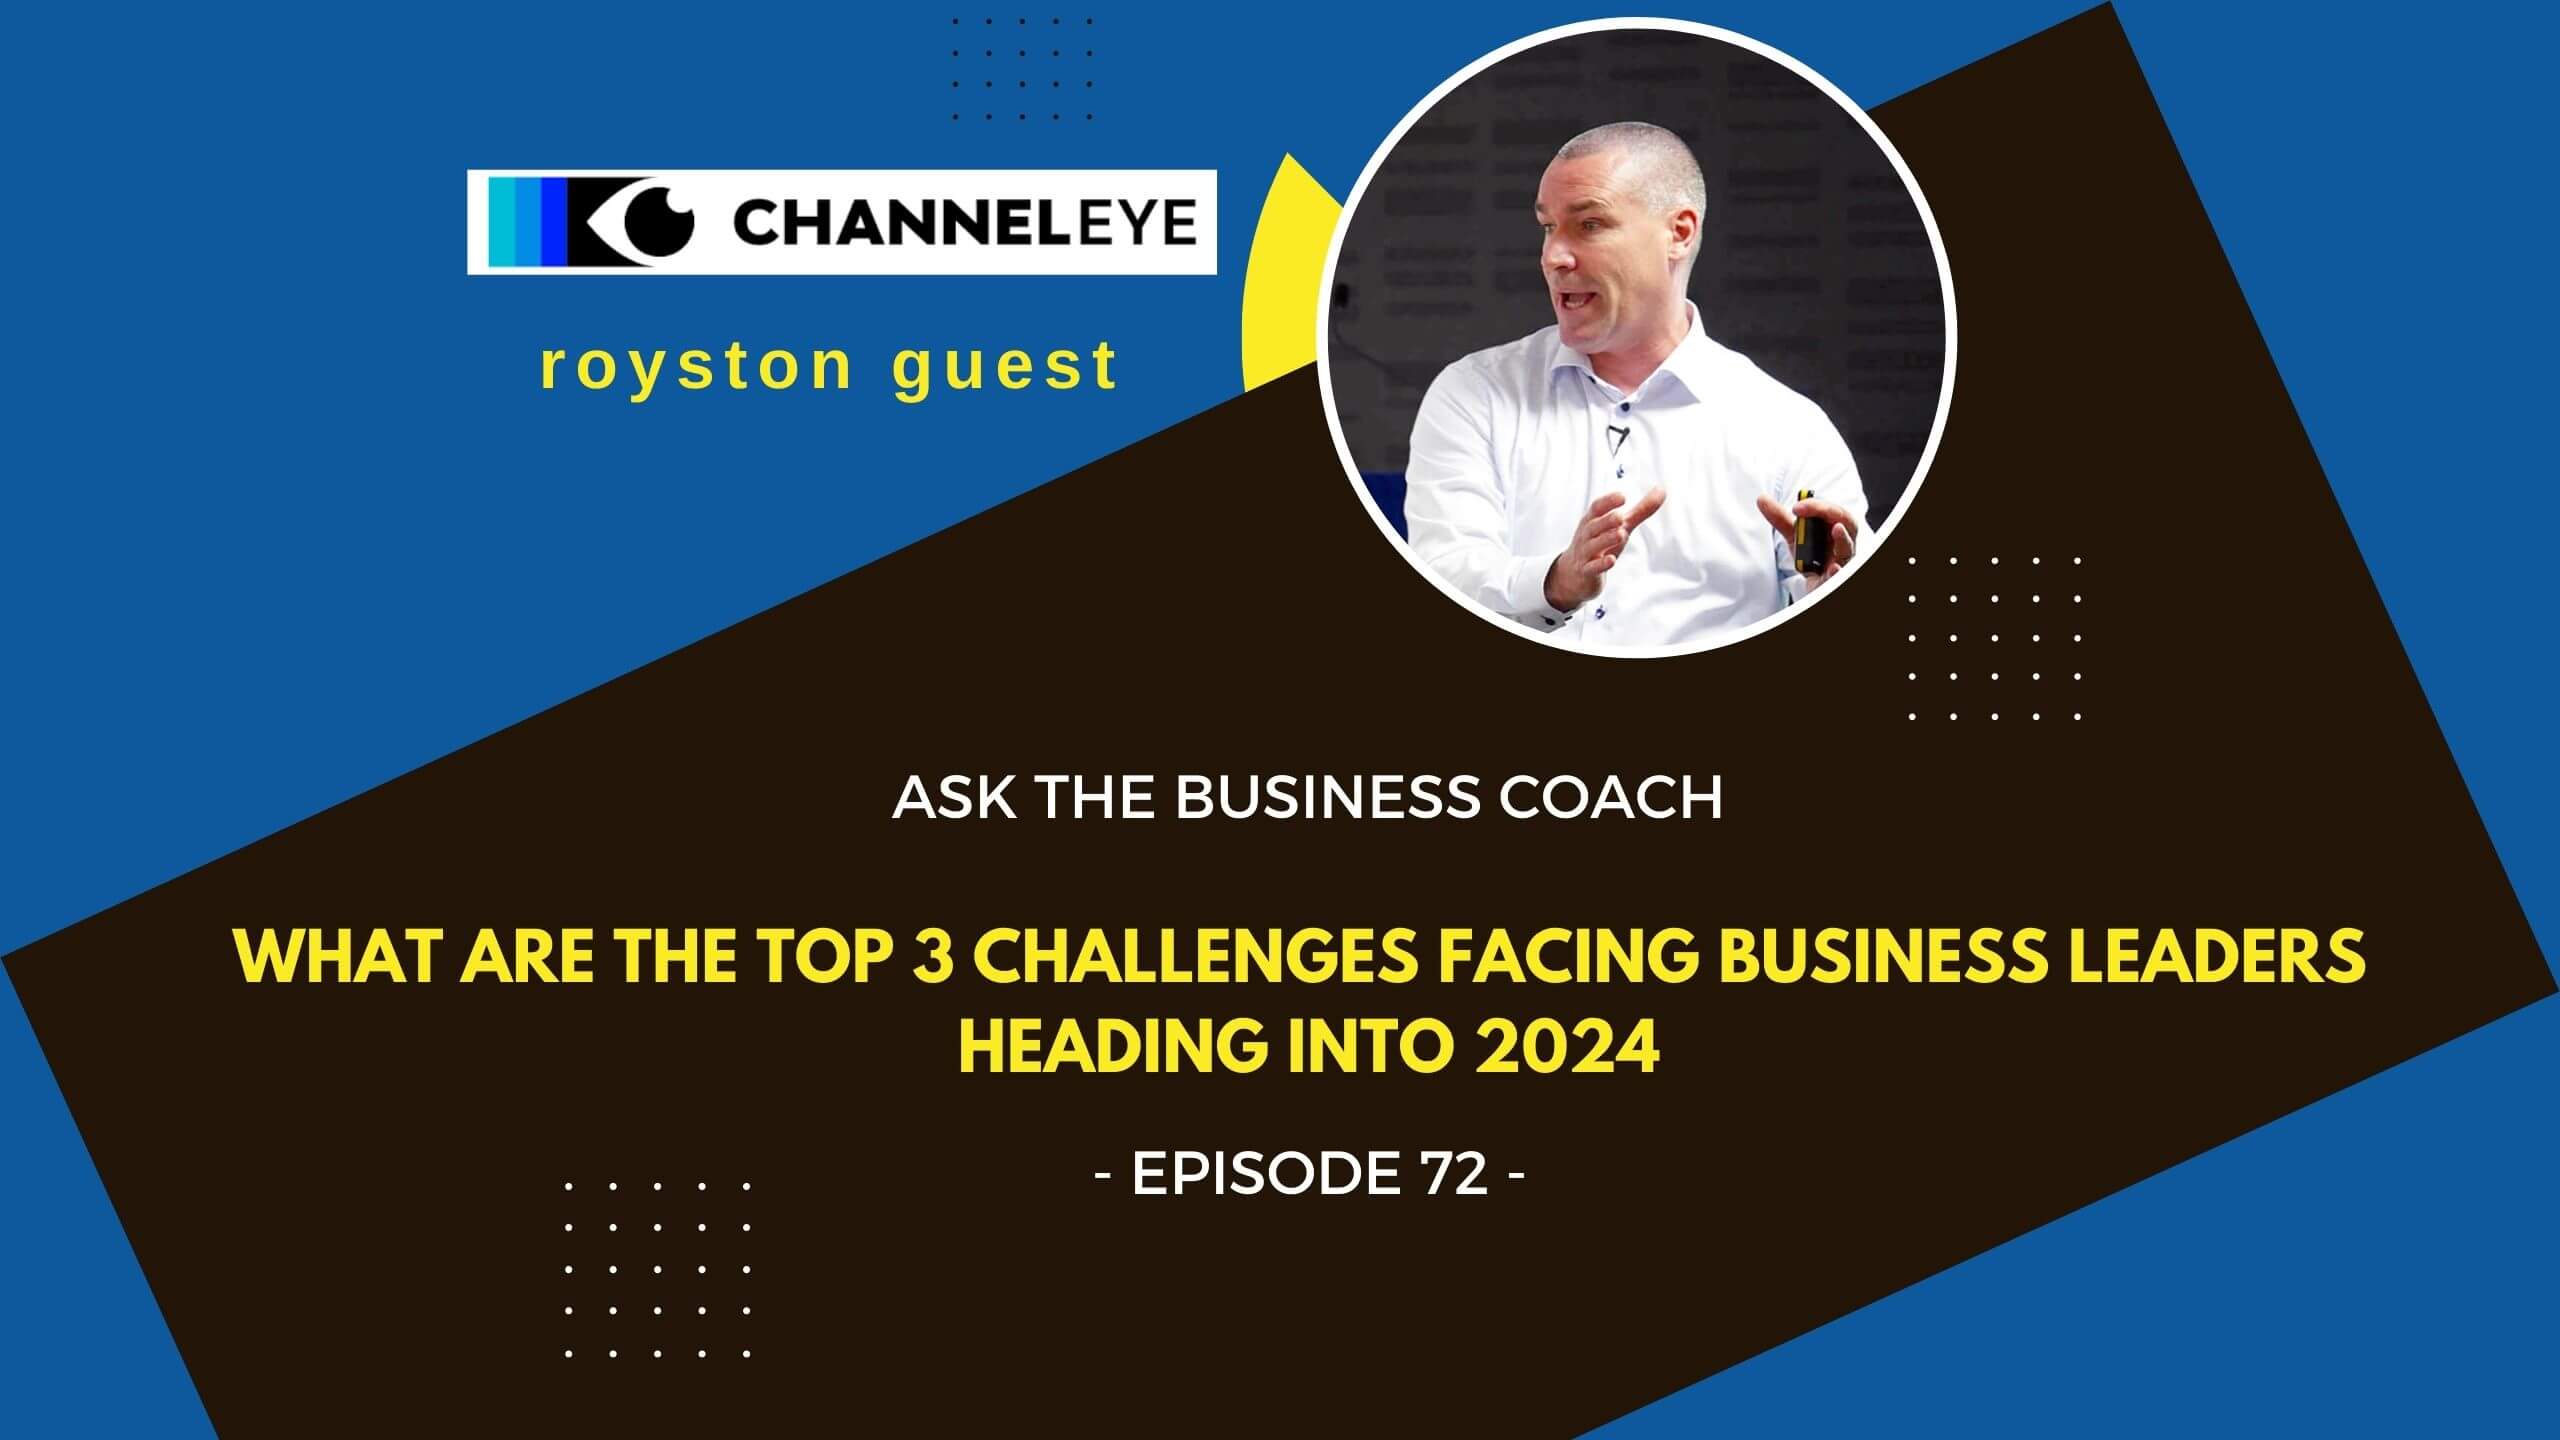 What are the top 3 challenges facing business owners heading into 2024